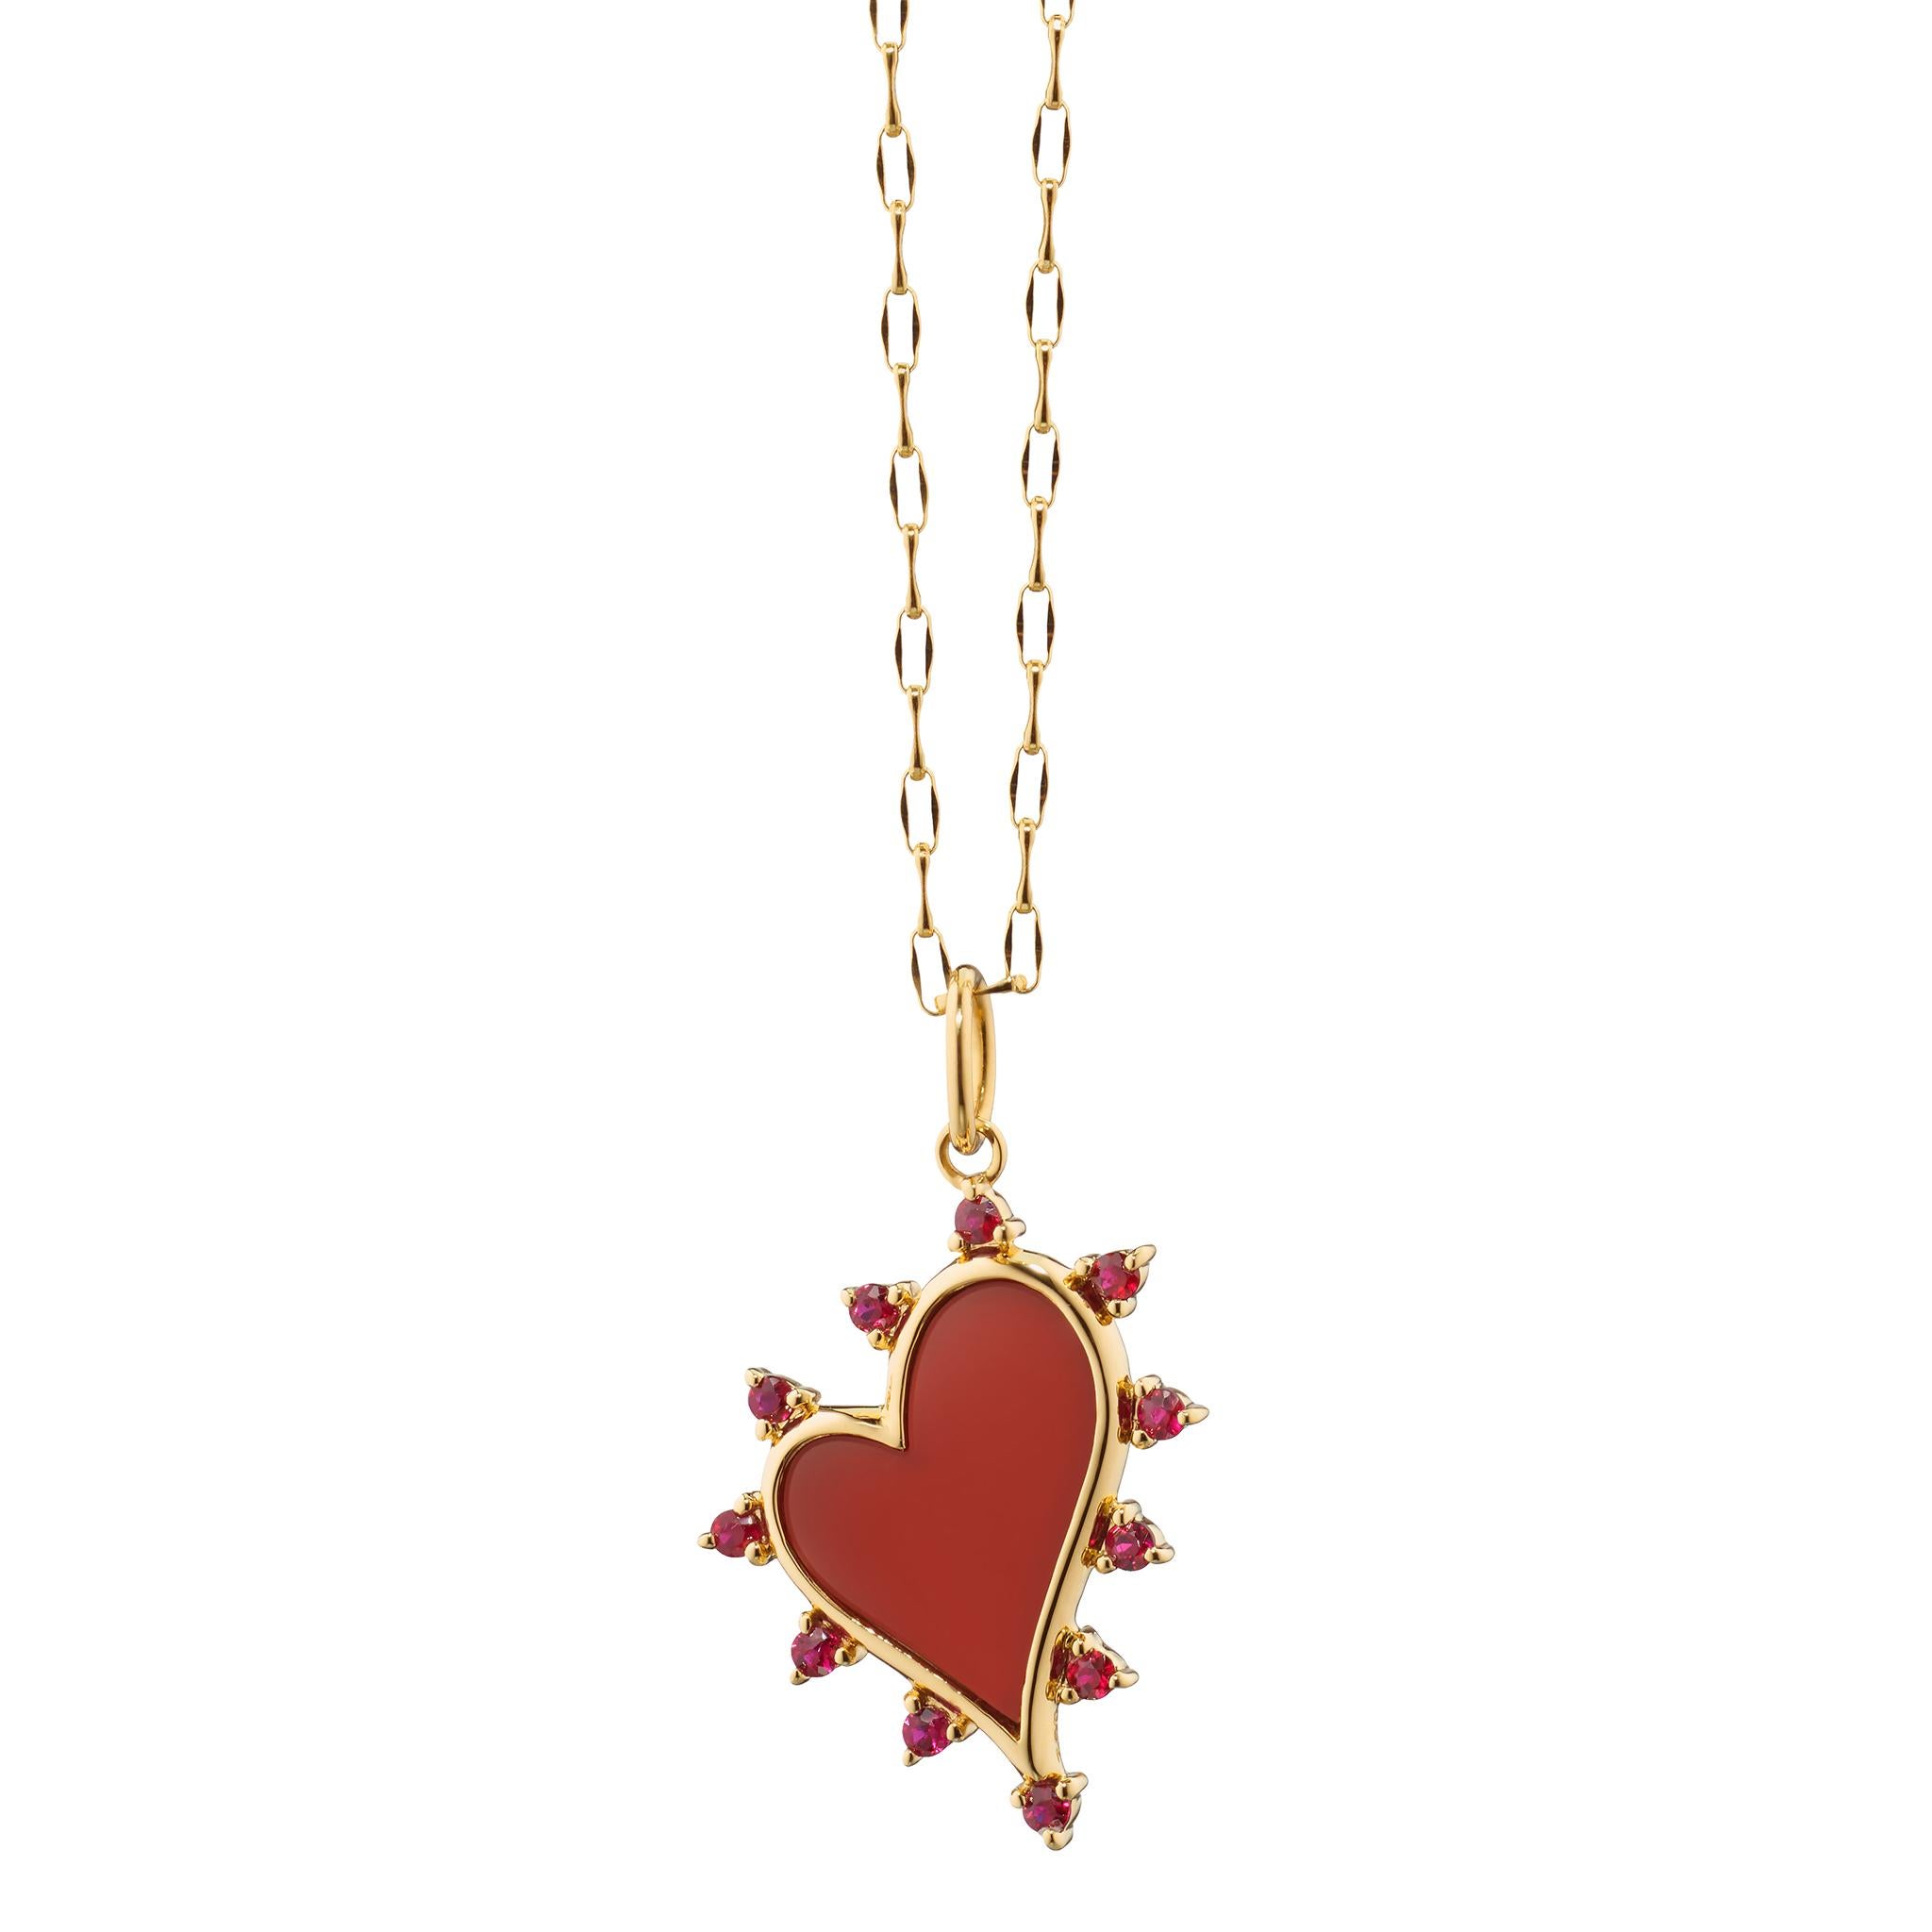 Contemporary Monica Rich Kosann 18K Yellow Gold Red Carnelian Heart Necklace with Rubies For Sale